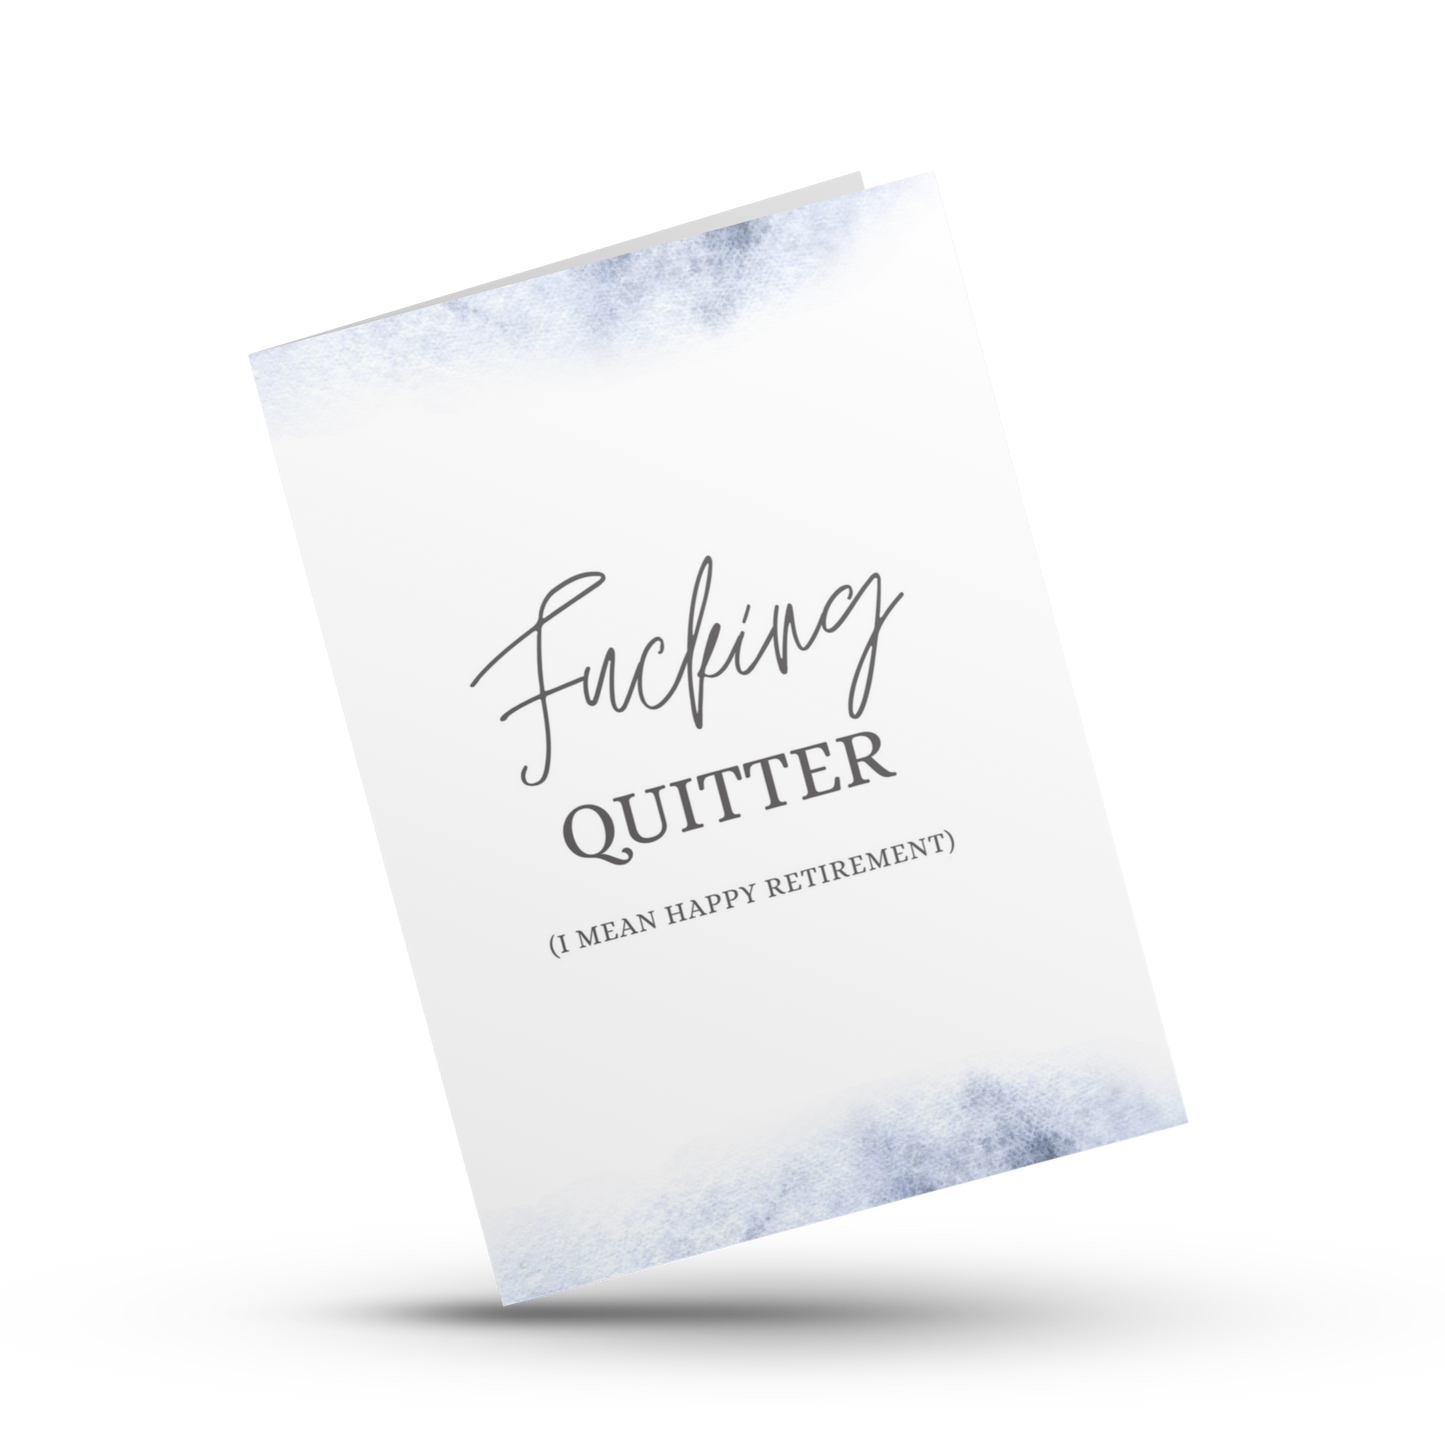 Fucking quitter card, Happy retirement card, Funny retirement card, Coworker goodbye card, Greeting card for retirement party, Card for boss